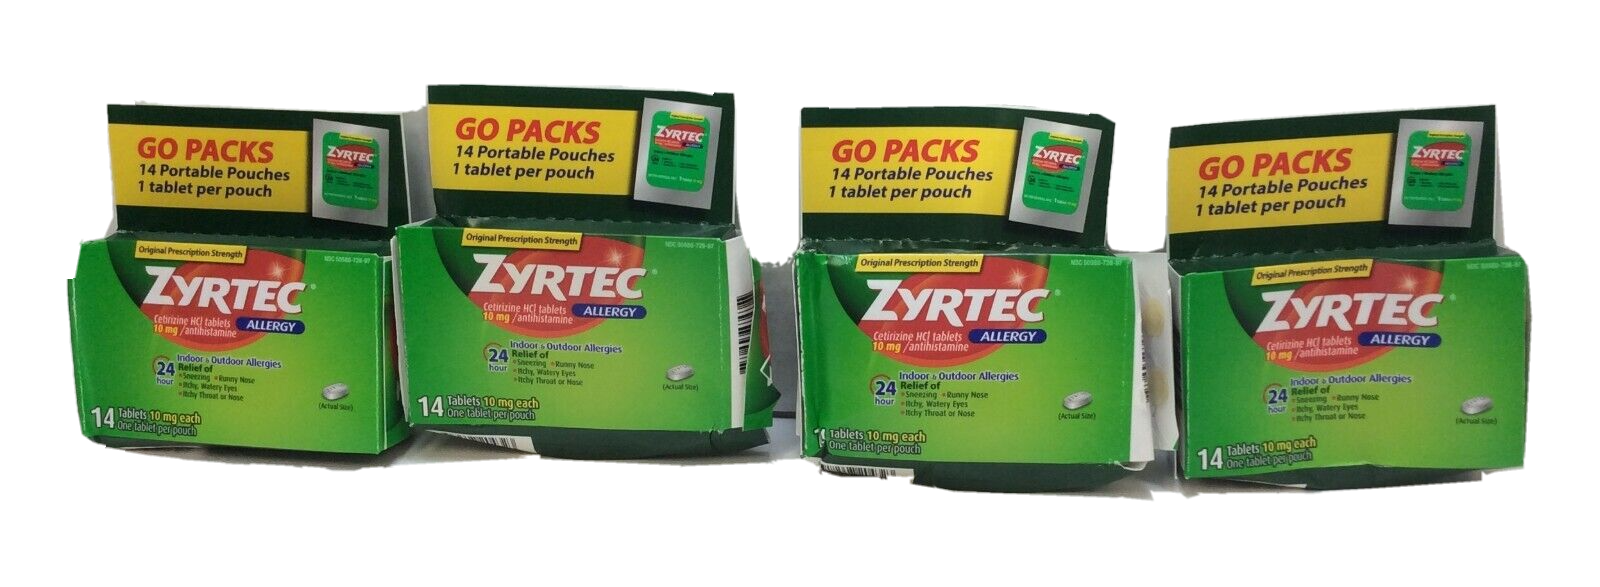 Zyrtec Allergy 10 mg, 56 Tablets, 24 Hr, Portable Pouches Exp . 10/2023 Zyrtec 20432